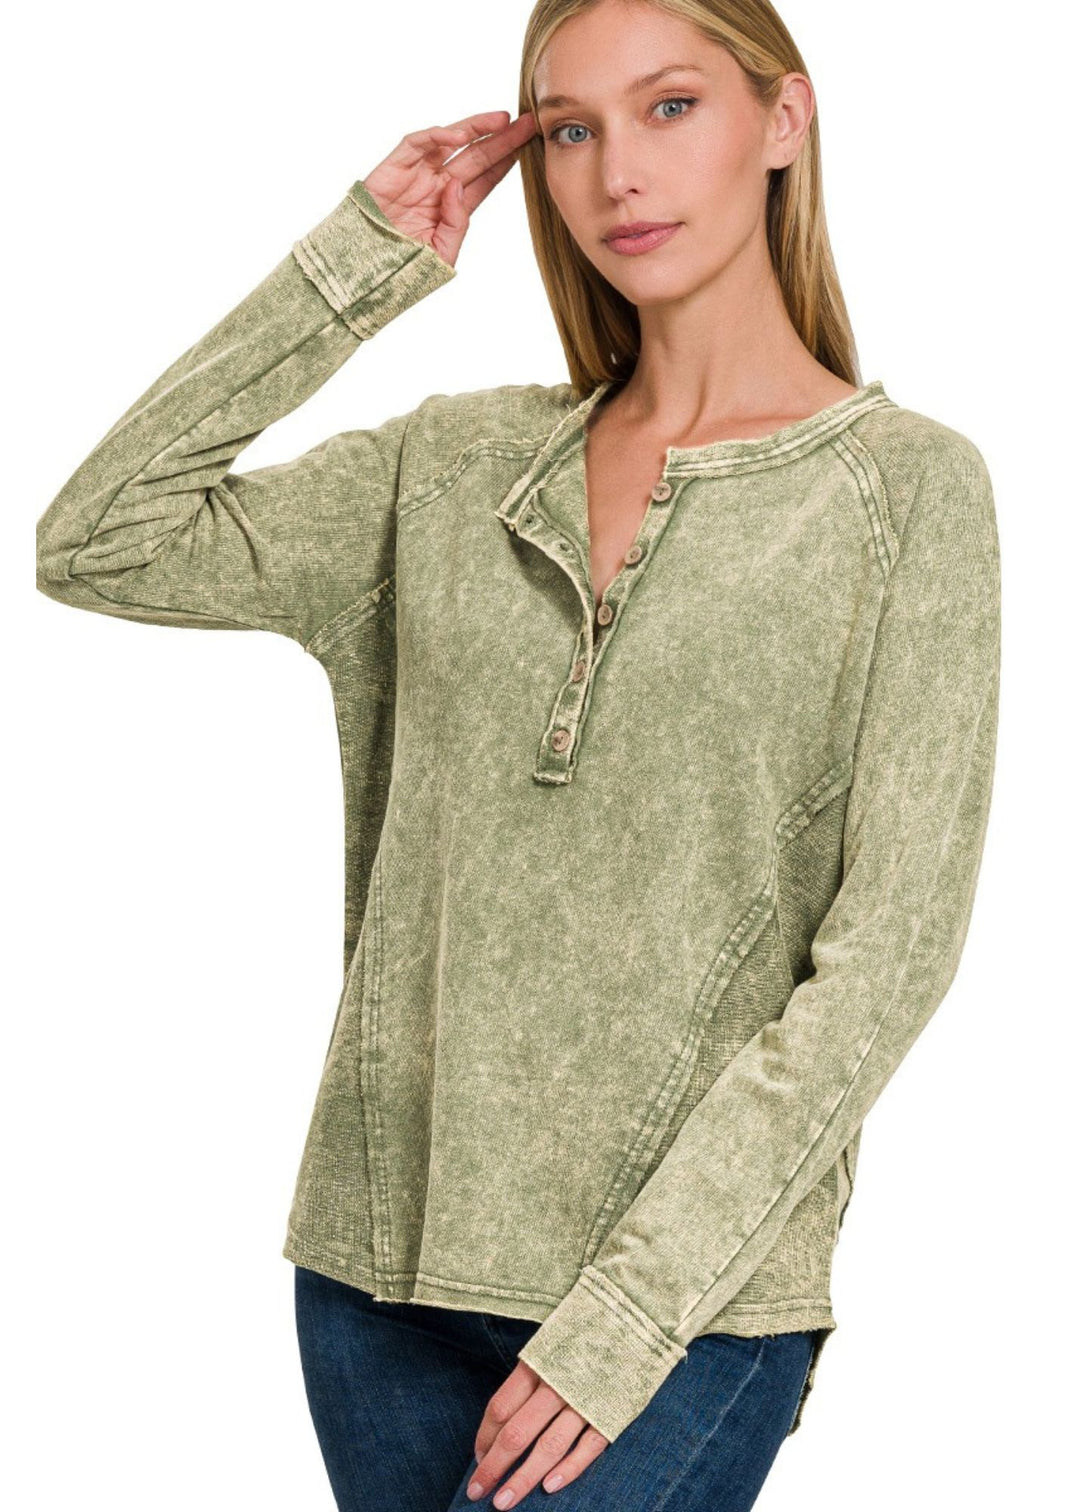 Zen French Terry Henley Top (Ash Olive)